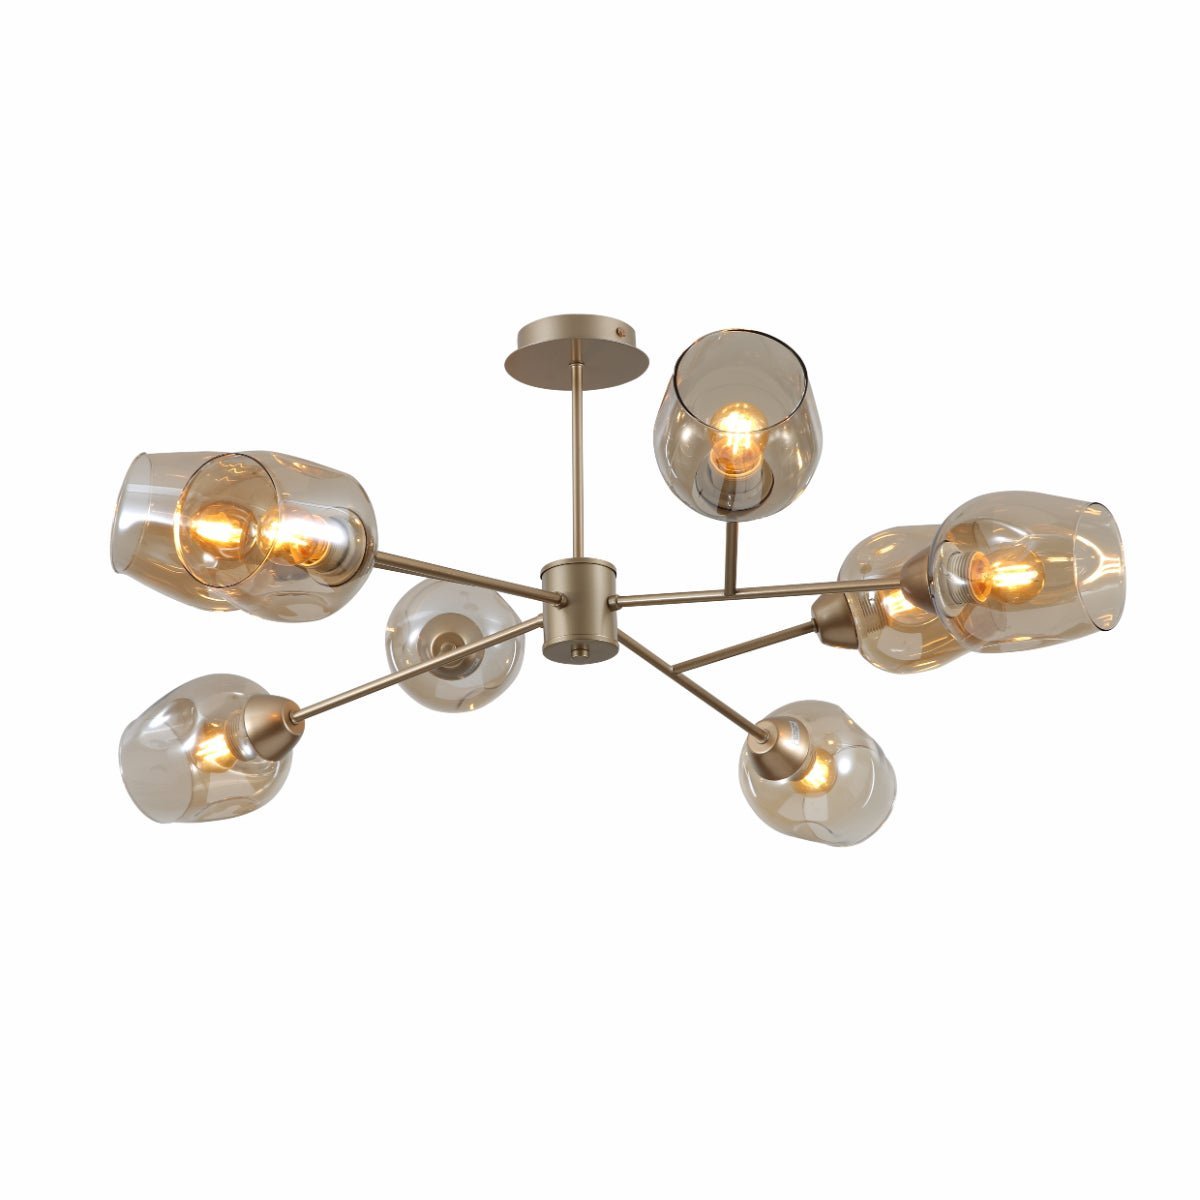 Main image of Amber Glass Metalic Gold Branch Twig Semi Flush Modern Ceiling Light with 8xE27 Fitting | TEKLED 159-17814